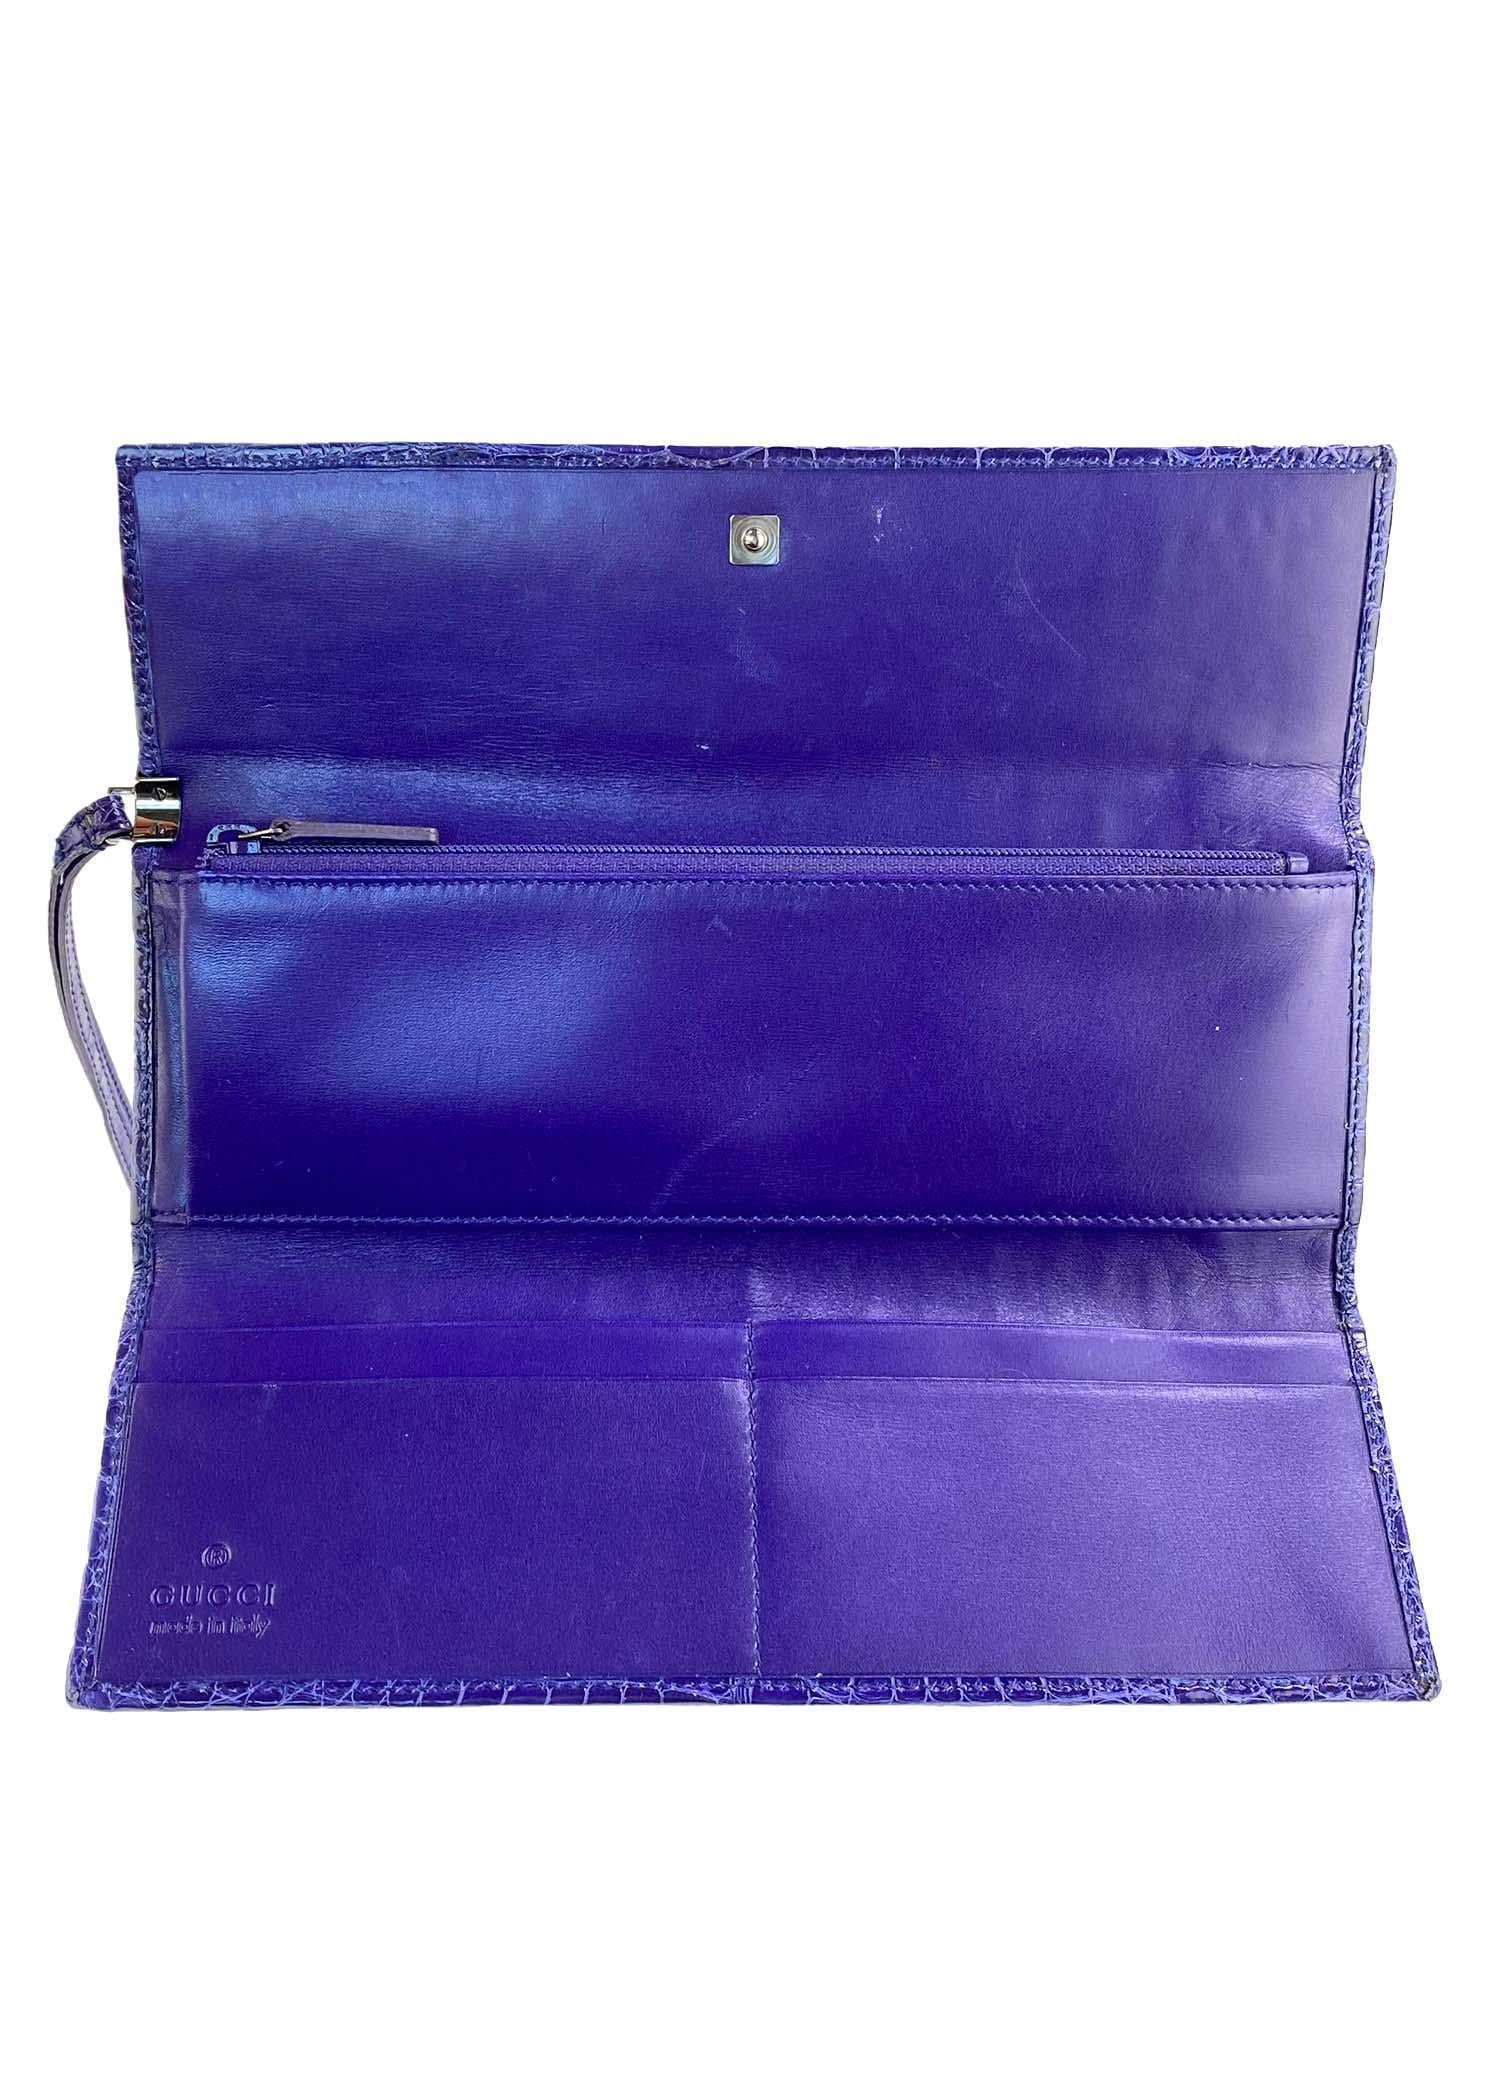 S/S 2001 Gucci by Tom Ford Purple Alligator Wristlet Zip Wallet Clutch In Good Condition For Sale In West Hollywood, CA